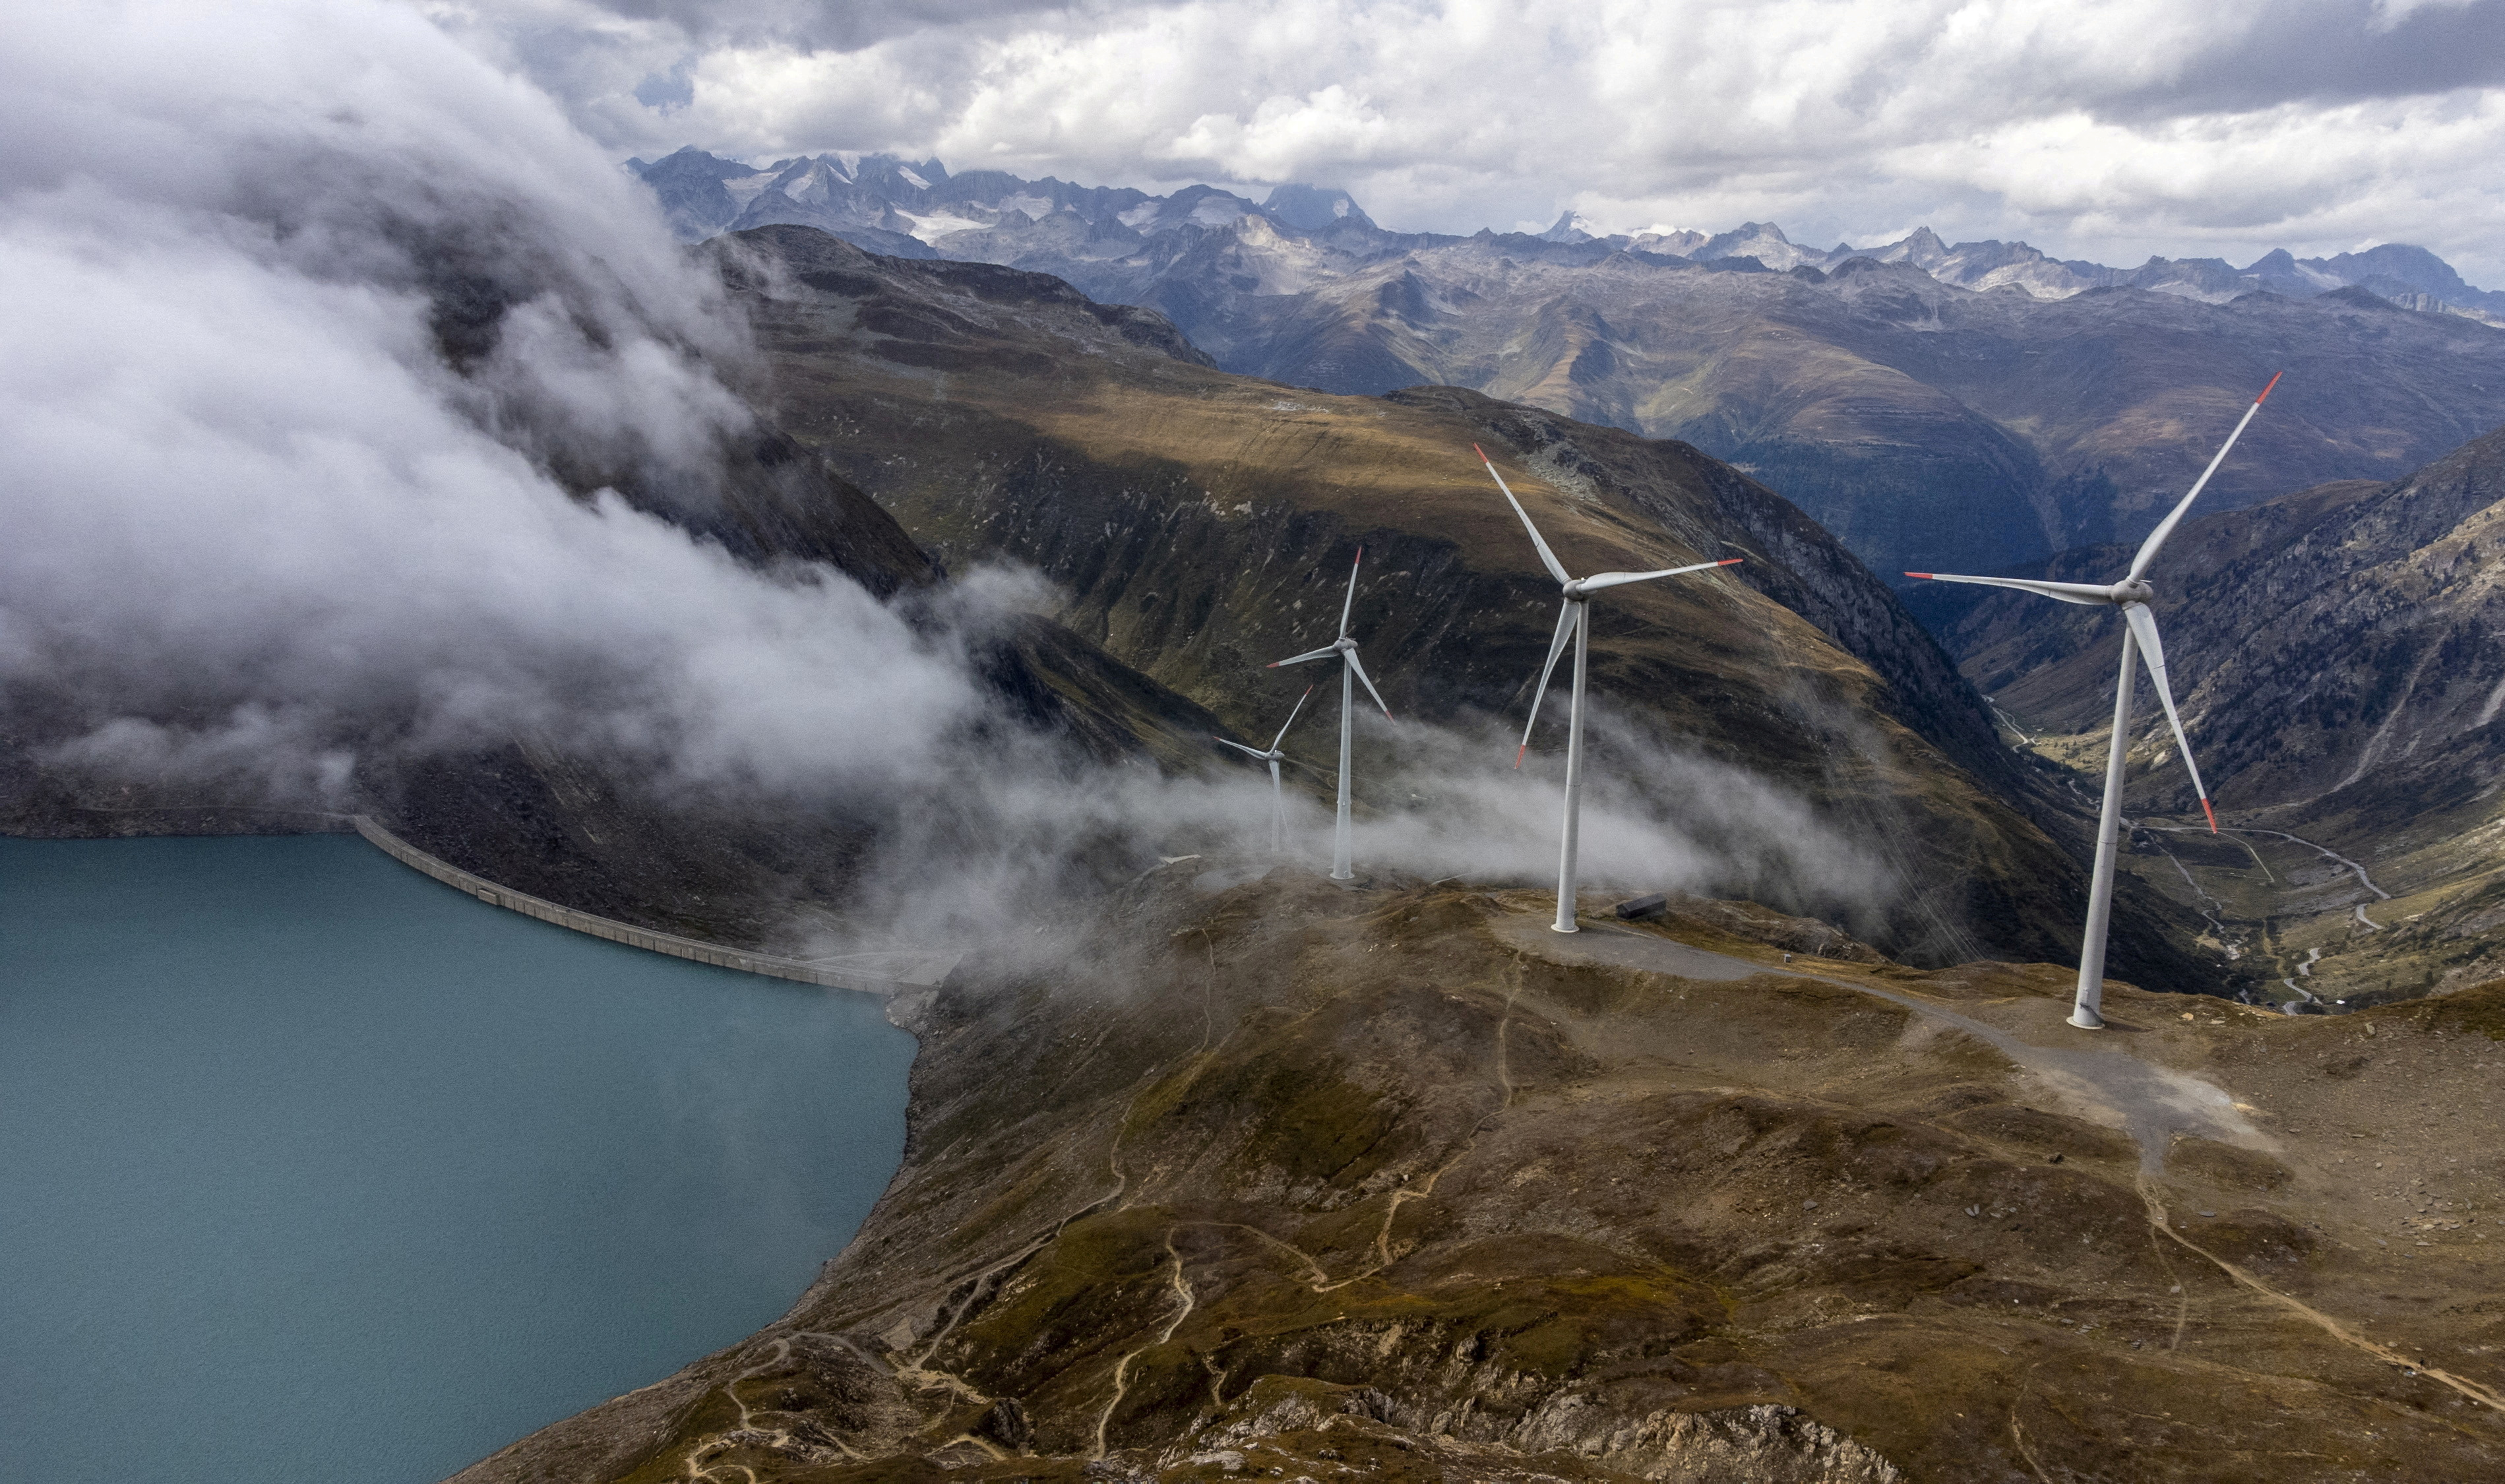 Windmills are seen near the Nufenen Pass in Gries